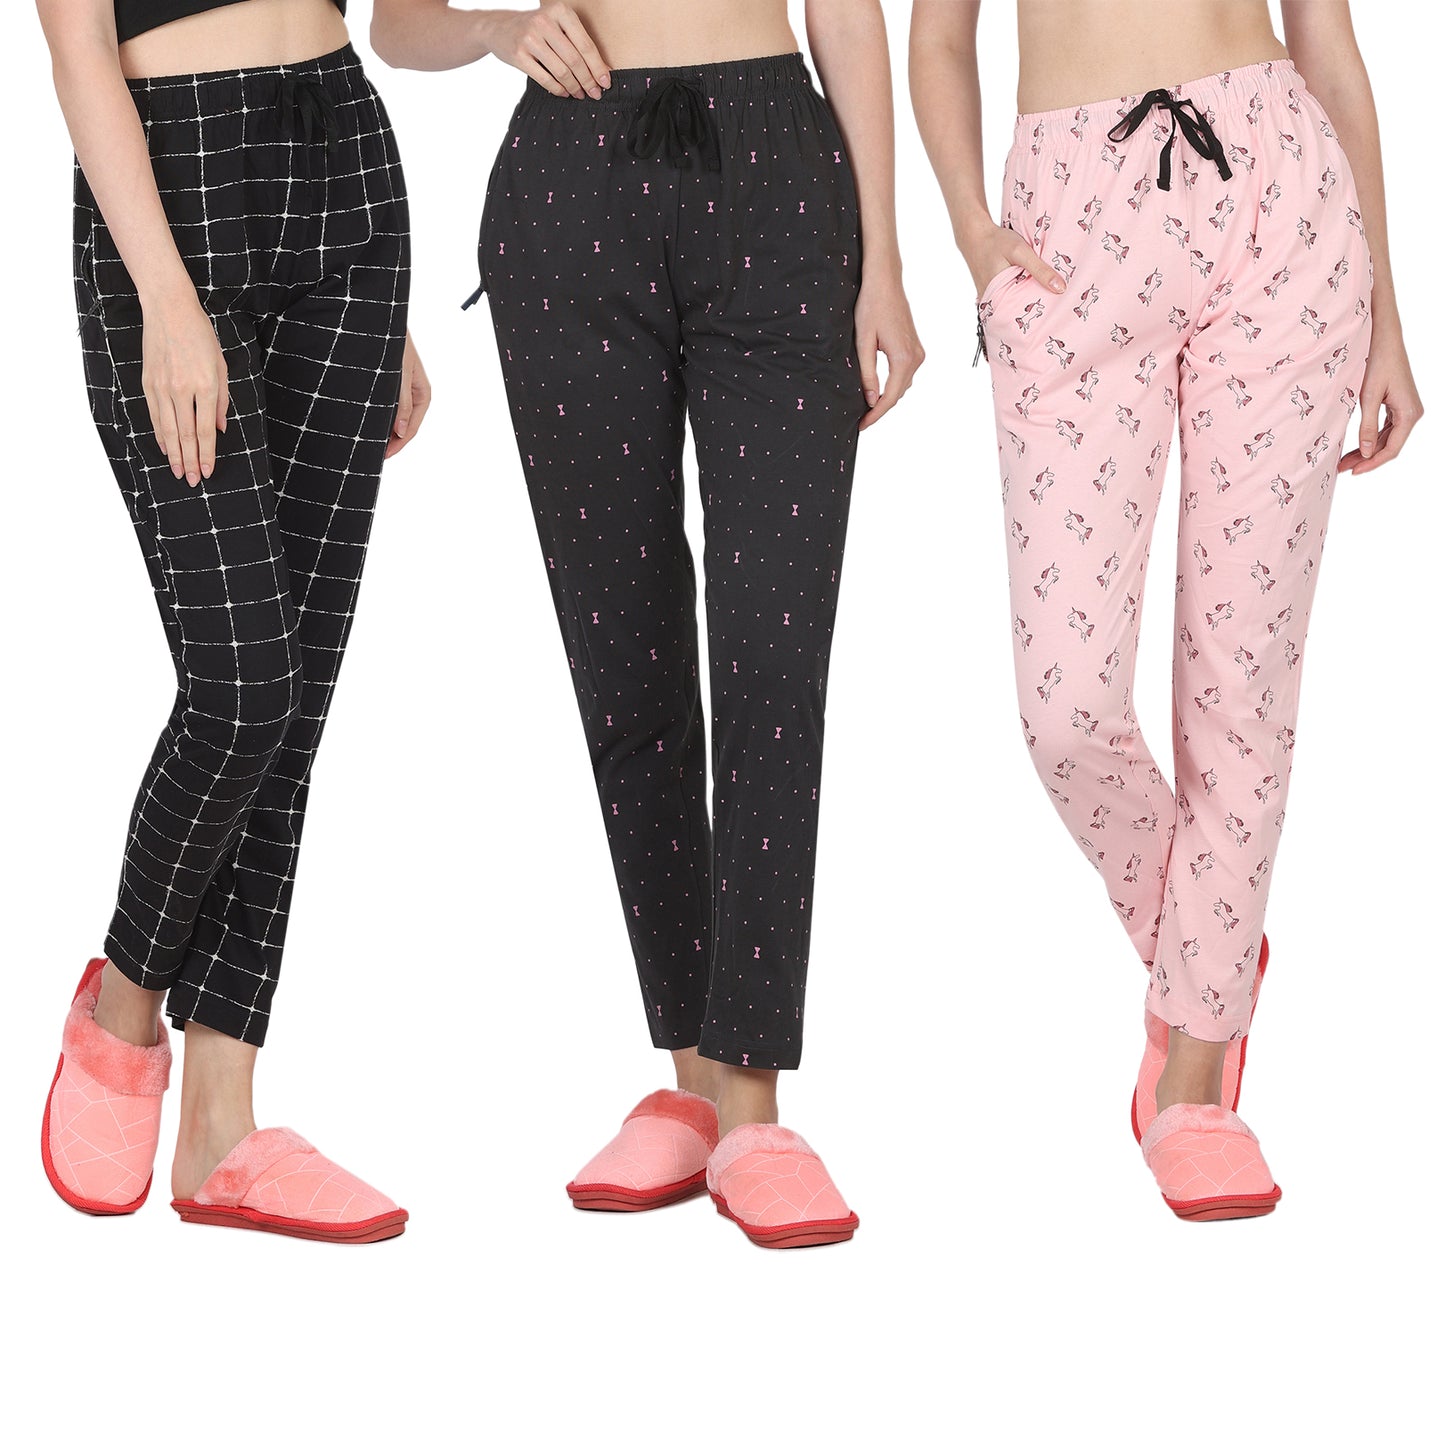 Eazy Women's Printed Lower - Pack of 3 - Black, Charcoal Grey & Light Pink